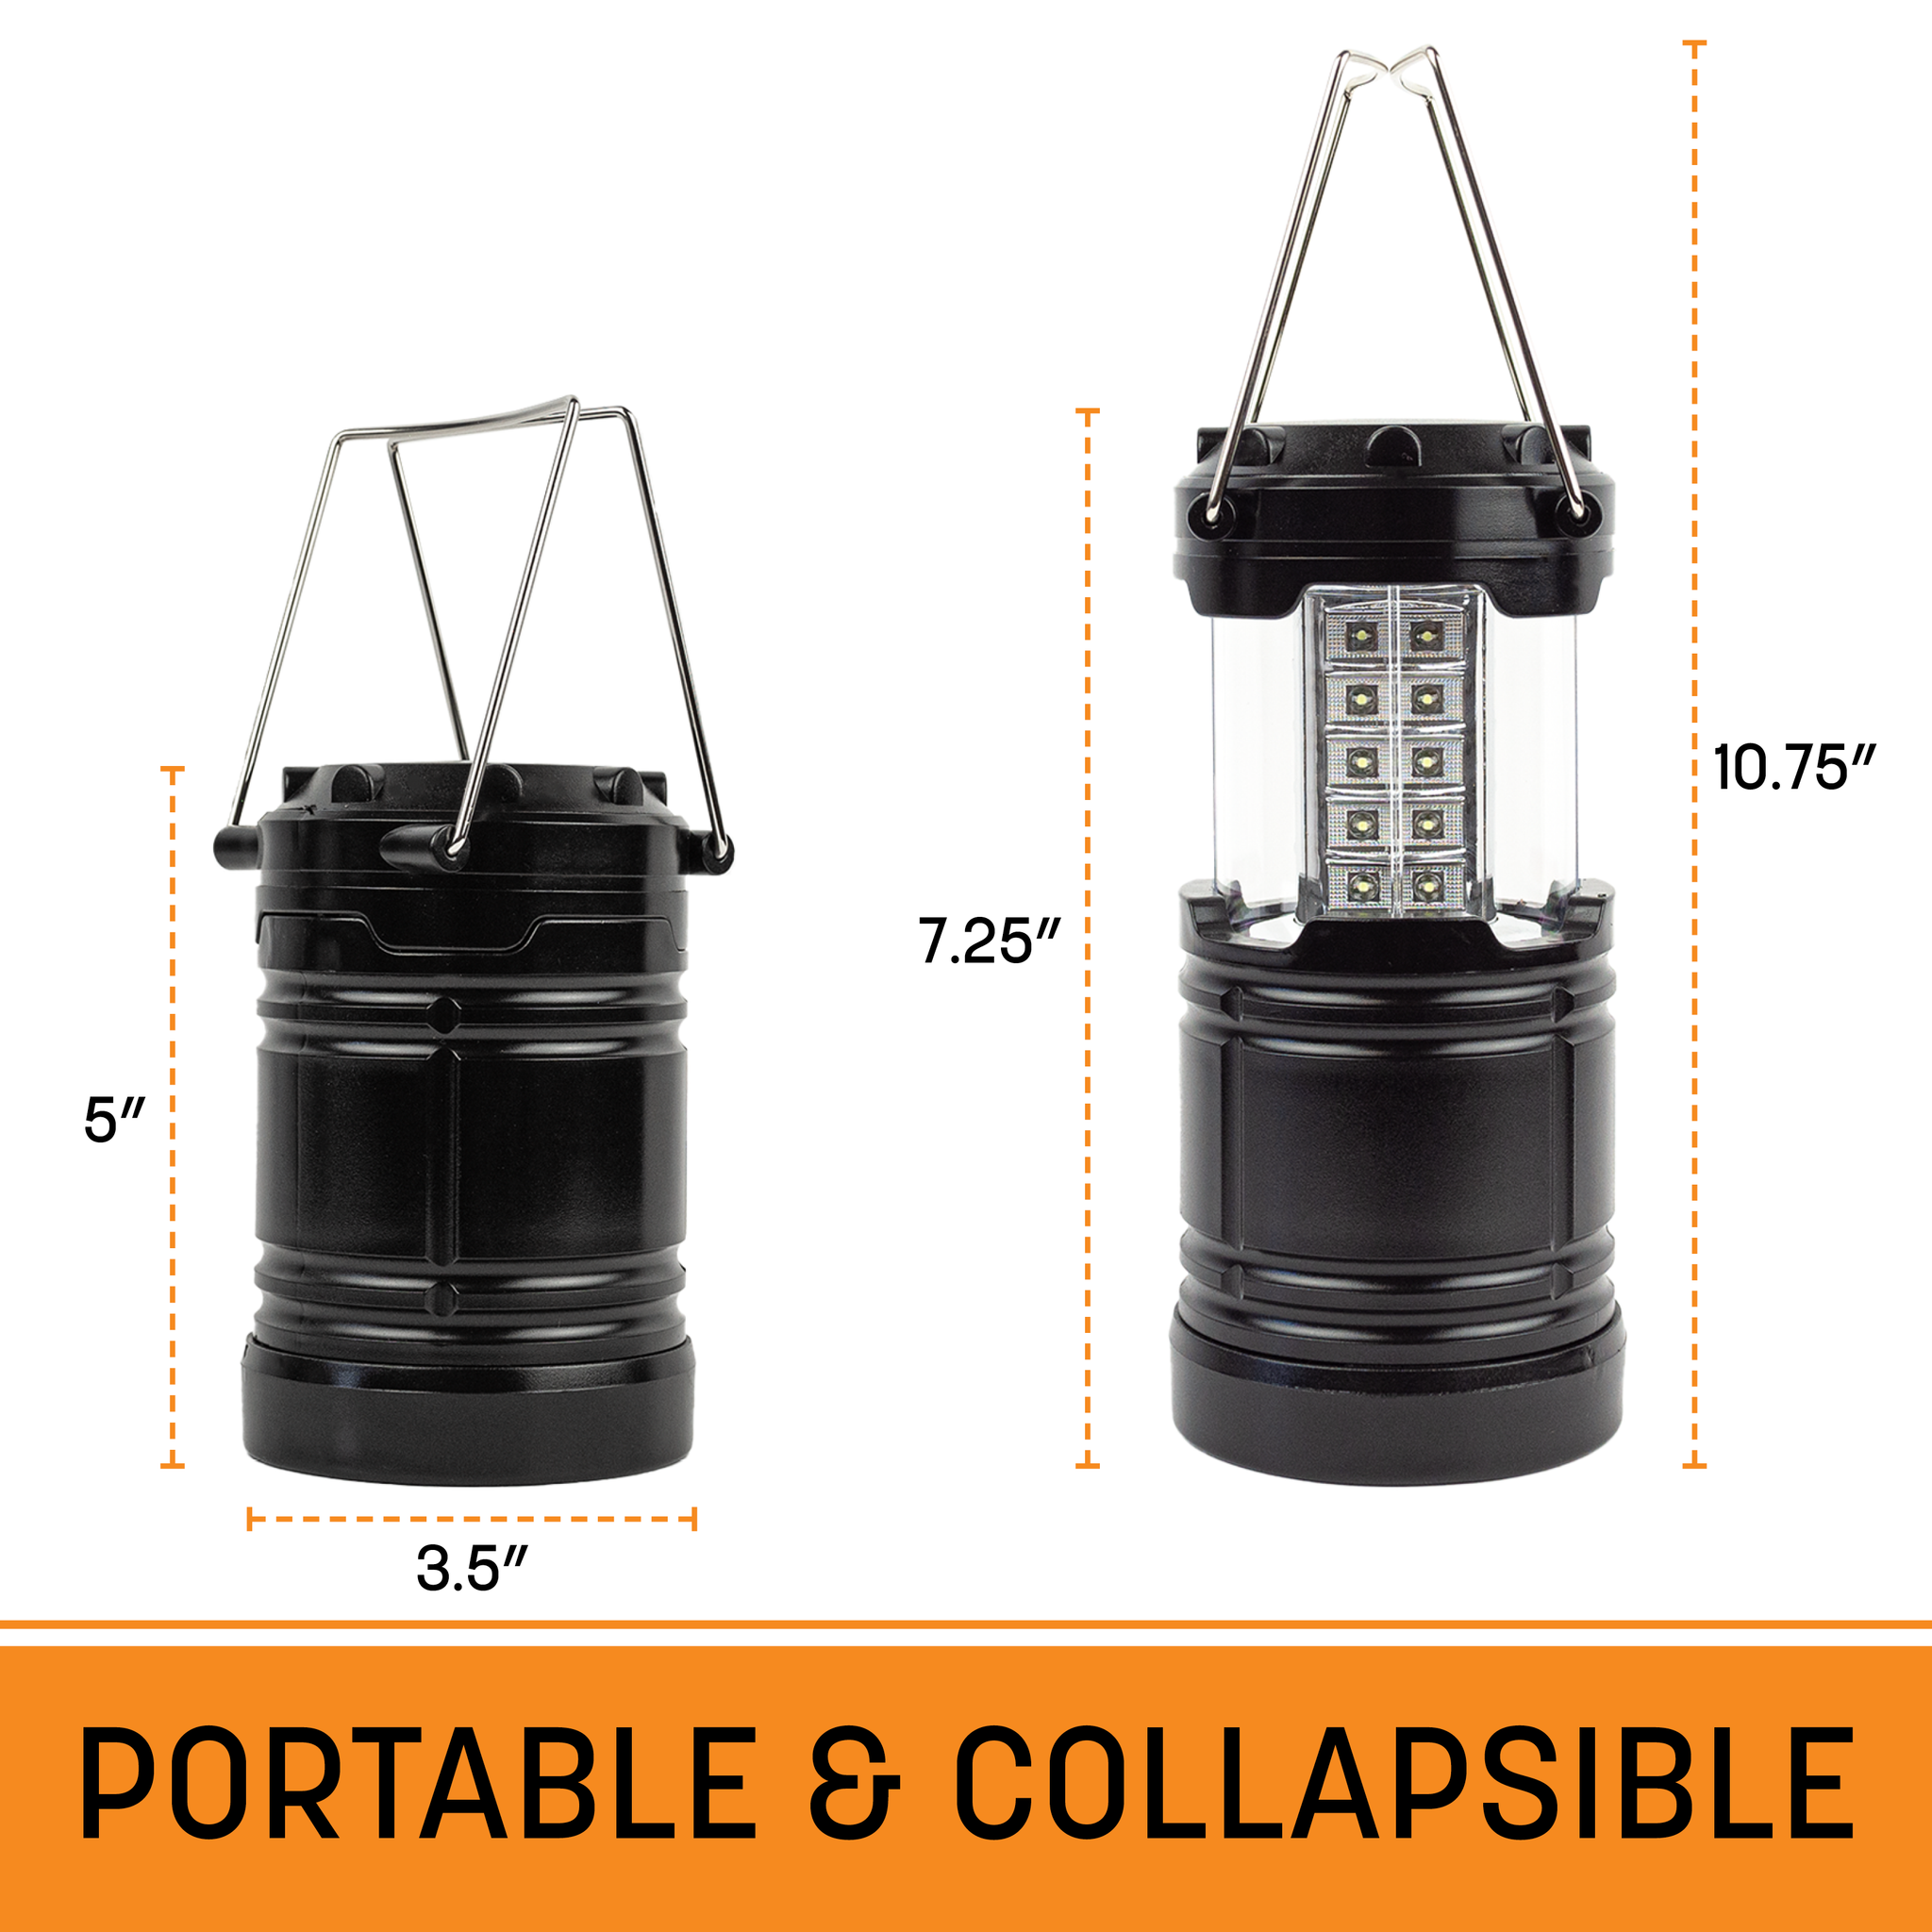 Collapsible LED Lantern - Great for Hiking, Camping, Emergency